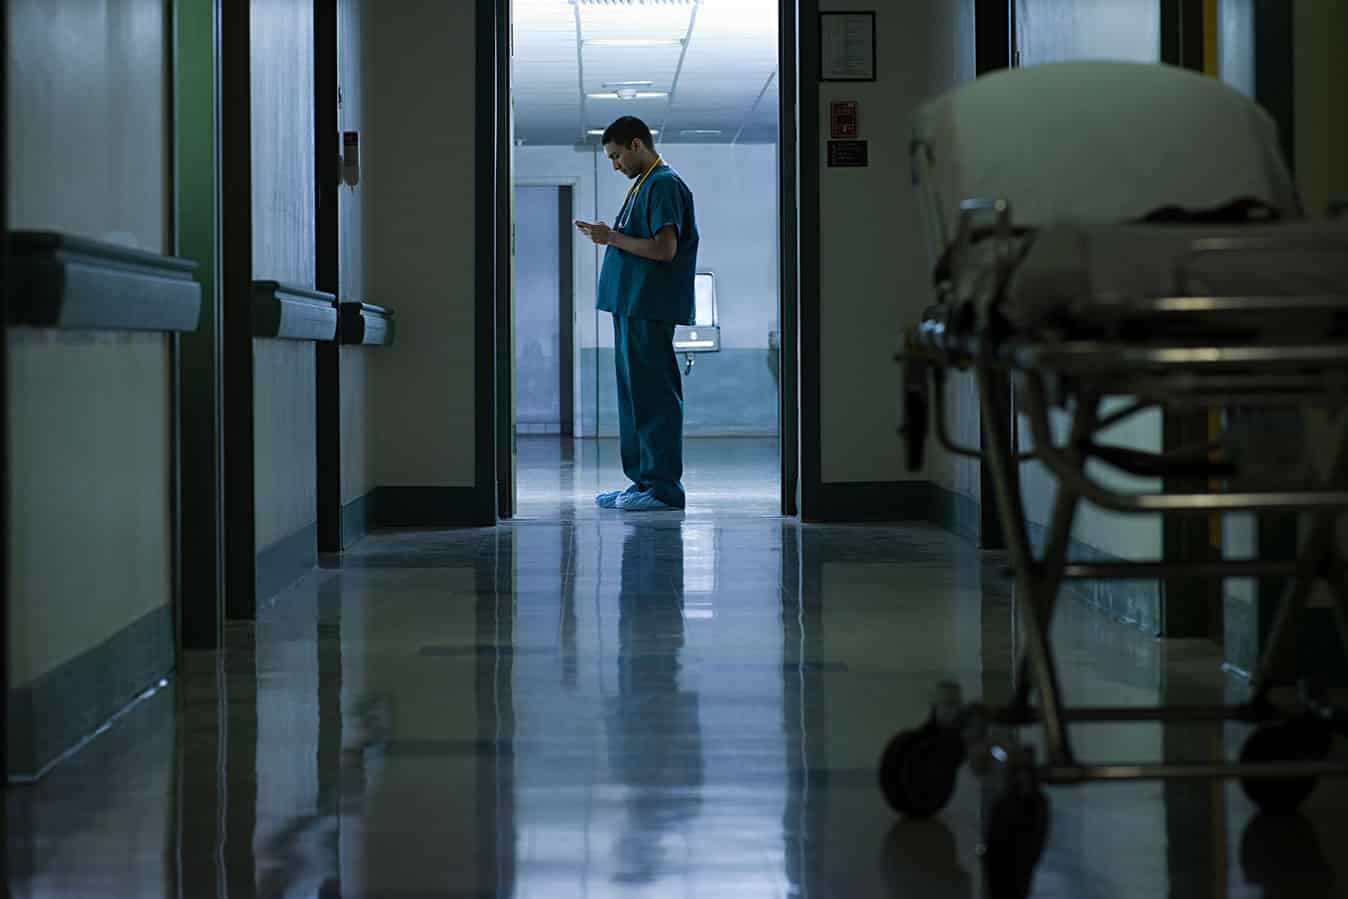 Focussing on health is important for night shift workers